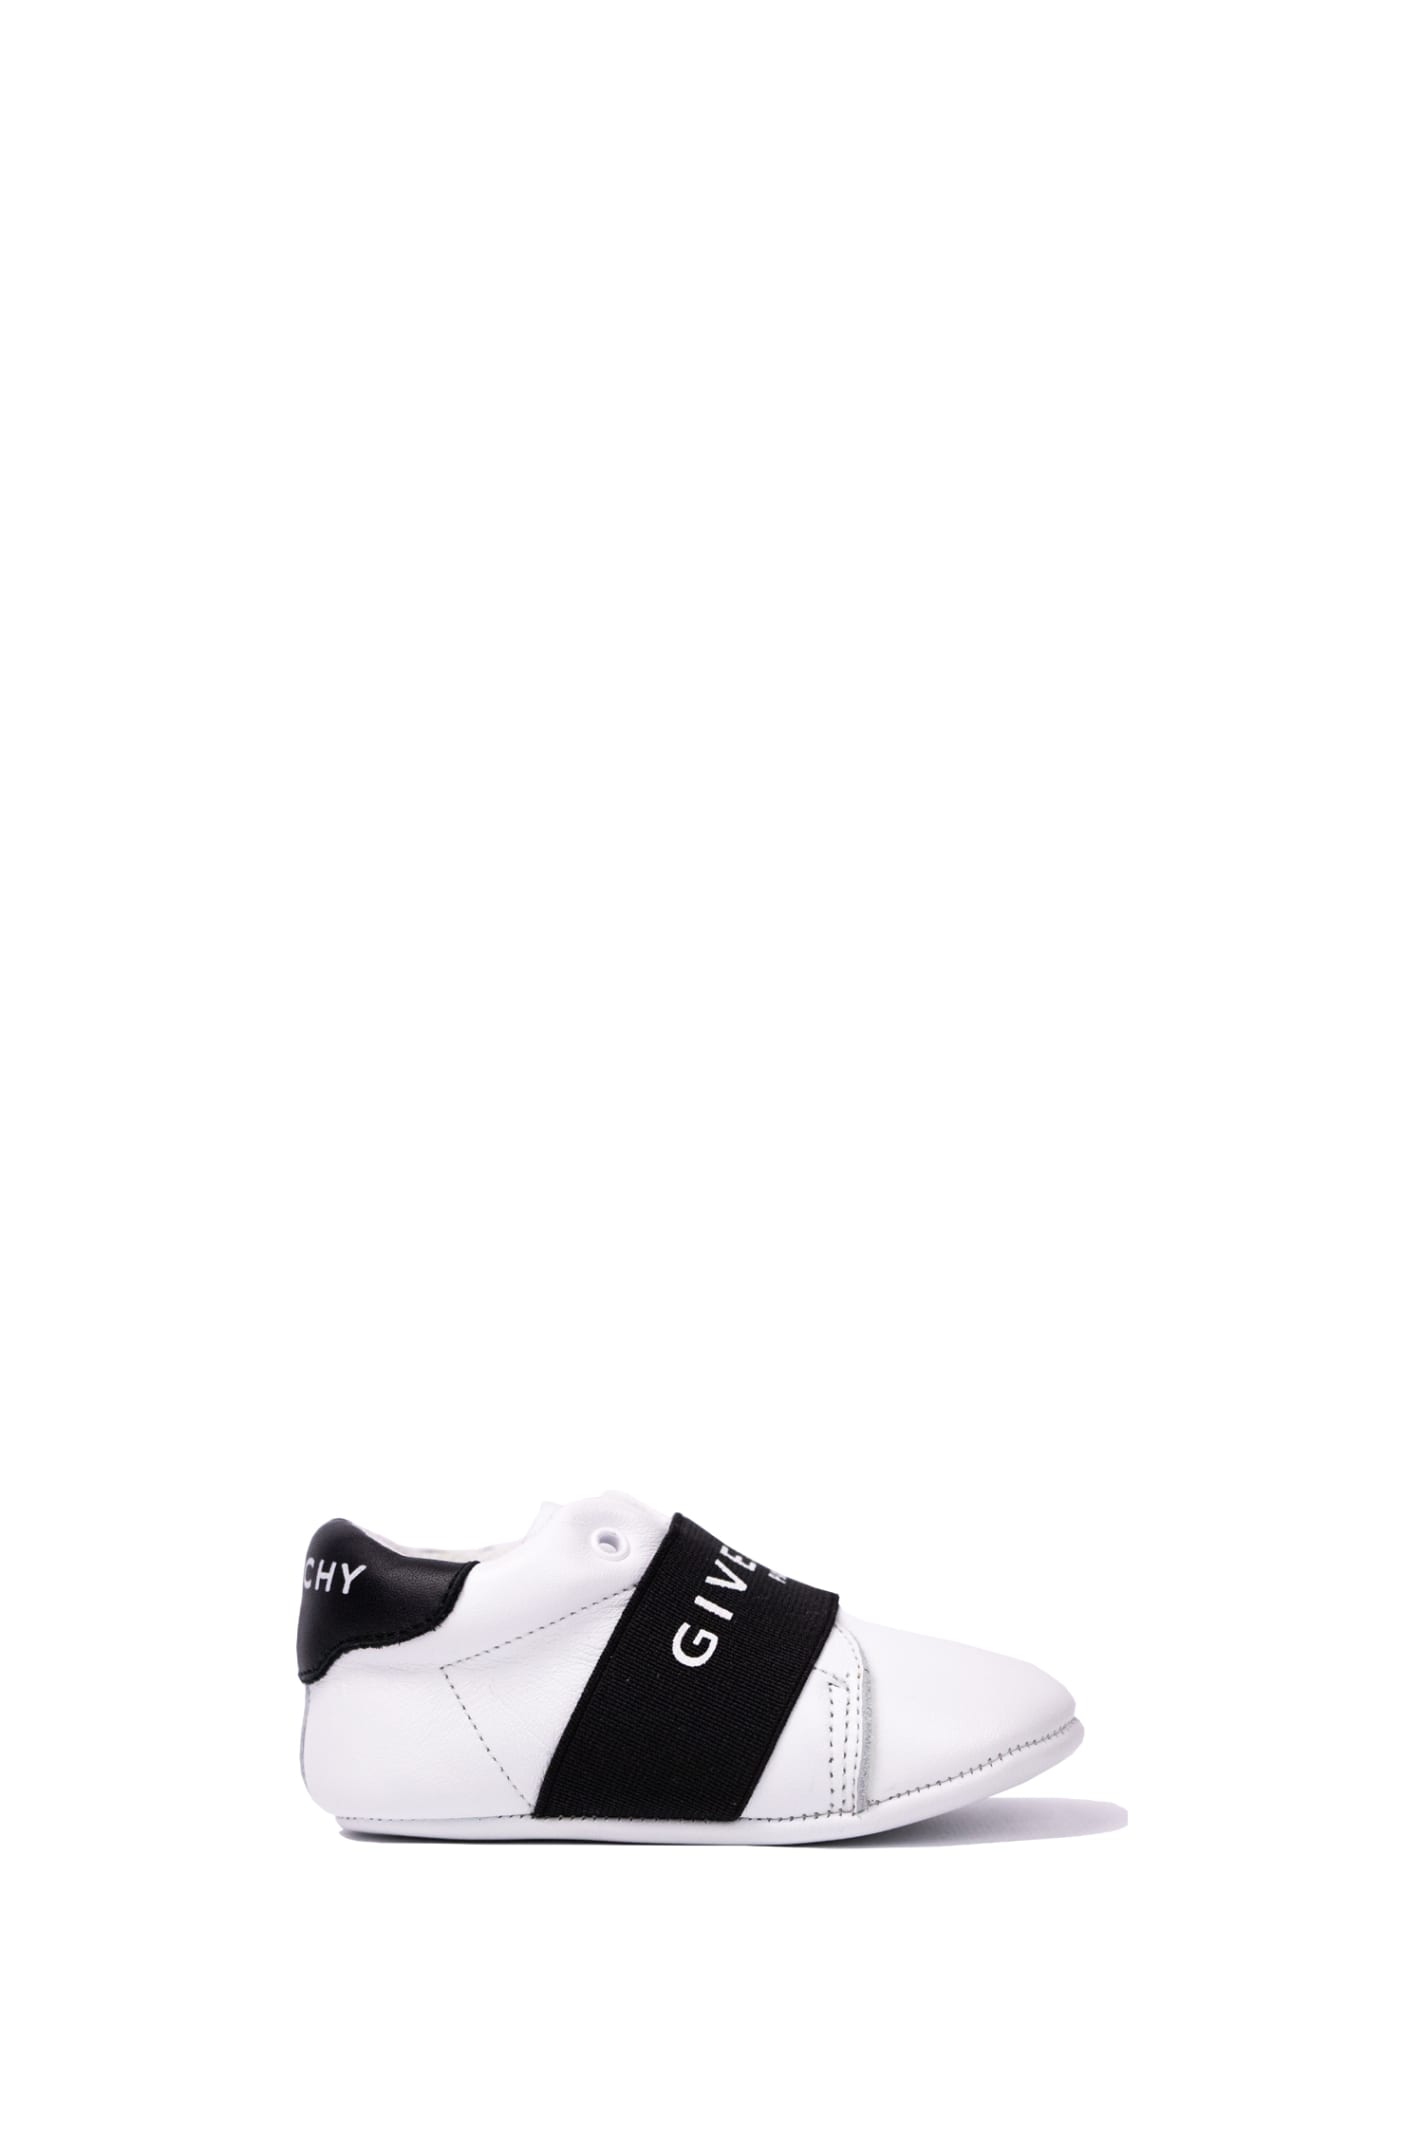 Givenchy Cradle Sneakers